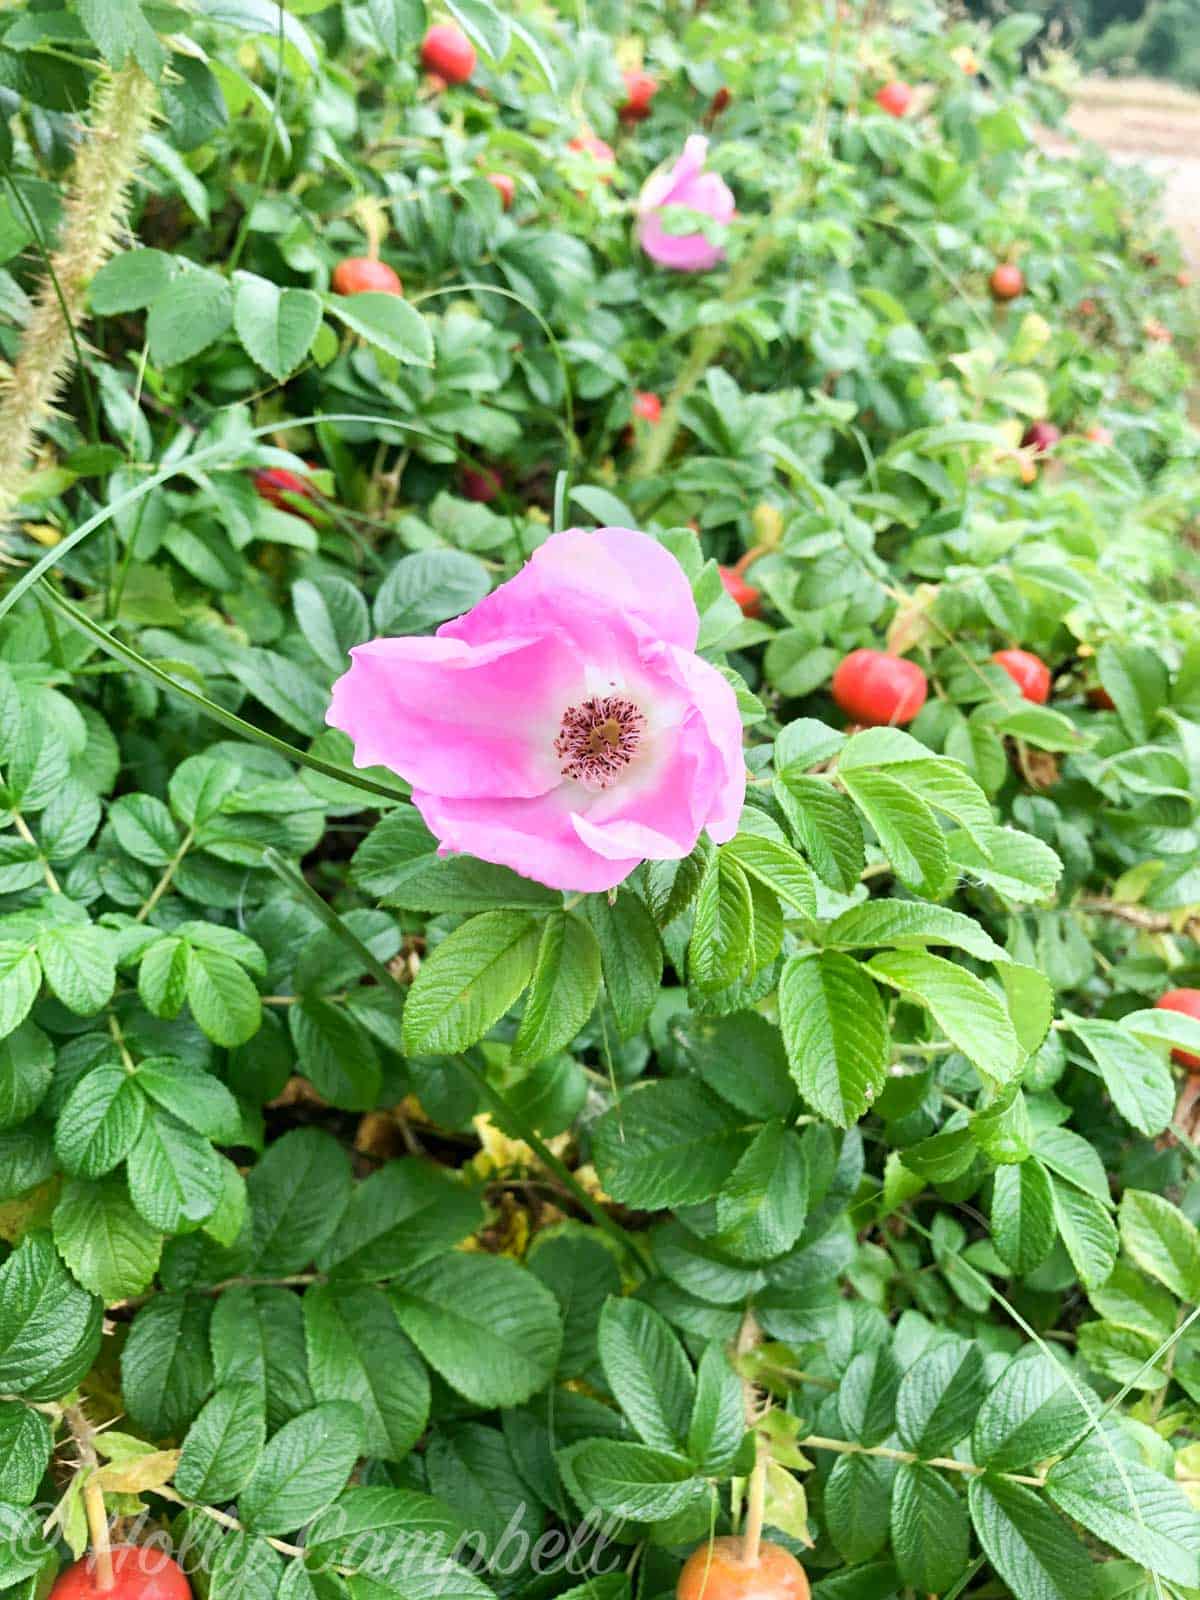 a wild rose flower with matur red rose hips in the background.